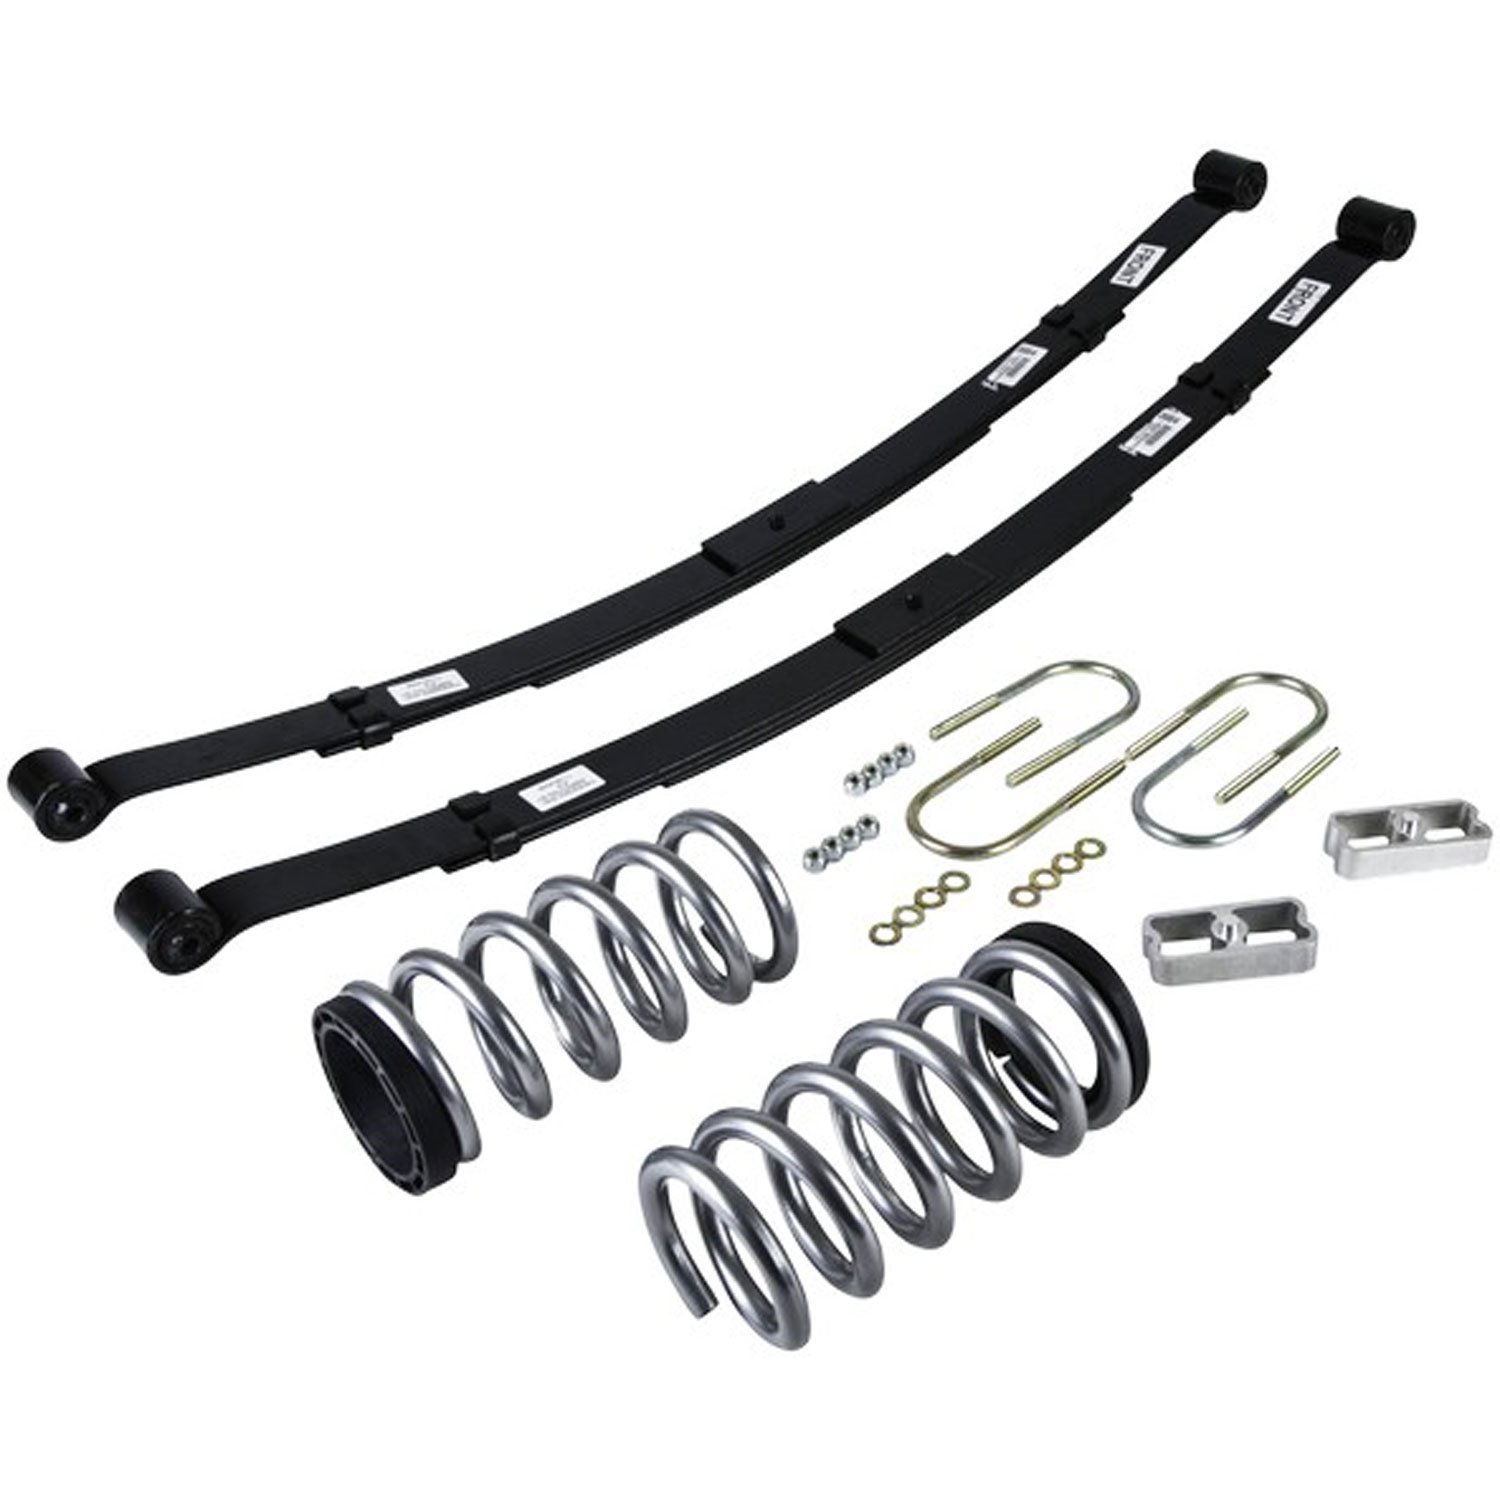 Complete Lowering Kit 1994-2004 Chevy S10/GMC S15